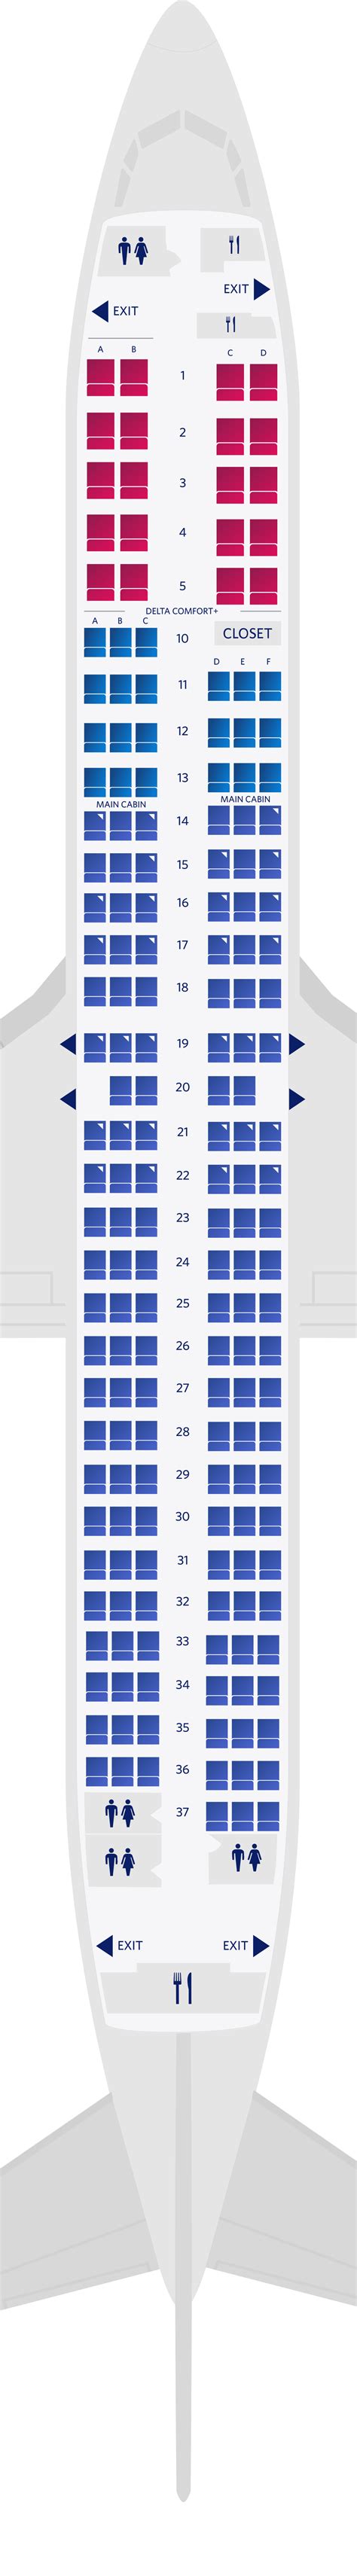 United 737-900 seat map. For your next United flight, use this seating chart to get the most comfortable seats, legroom, and recline on . Seat Maps; Airlines; Cheap Flights; Comparison Charts ... Boeing 737-900 (739) Layout 1; Boeing 737-900 (739) Layout 2; Boeing 737-900 (739) Layout 3; Boeing 757-200 (752) Layout 1; 